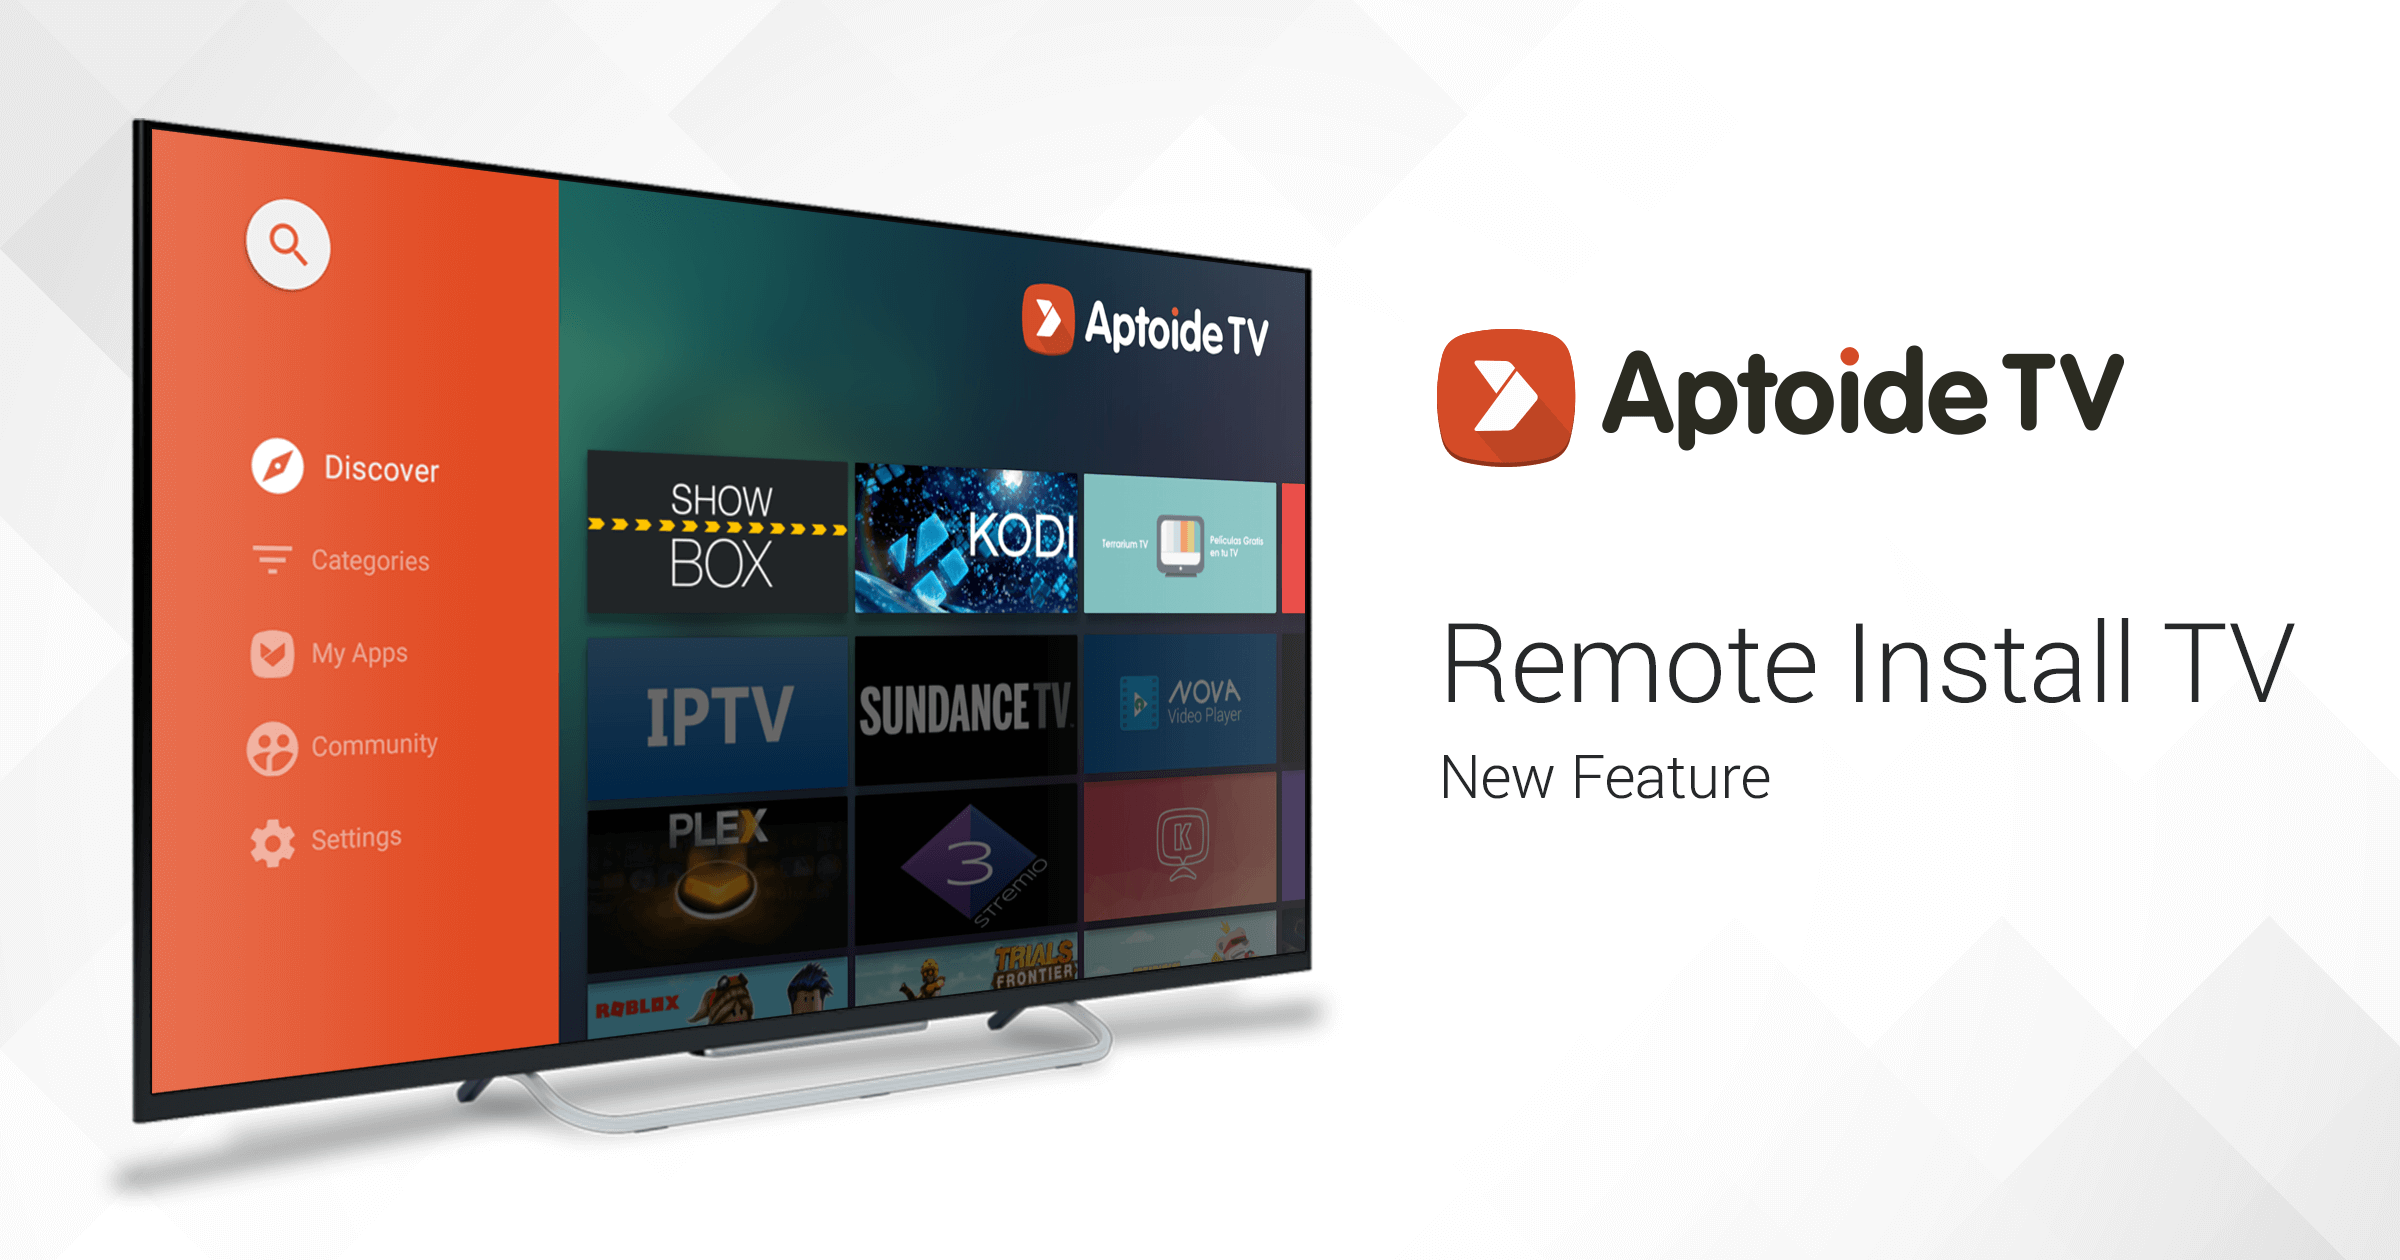 Install Apps On Your Android TV From Your Smartphone With AptoideTV - Updated!